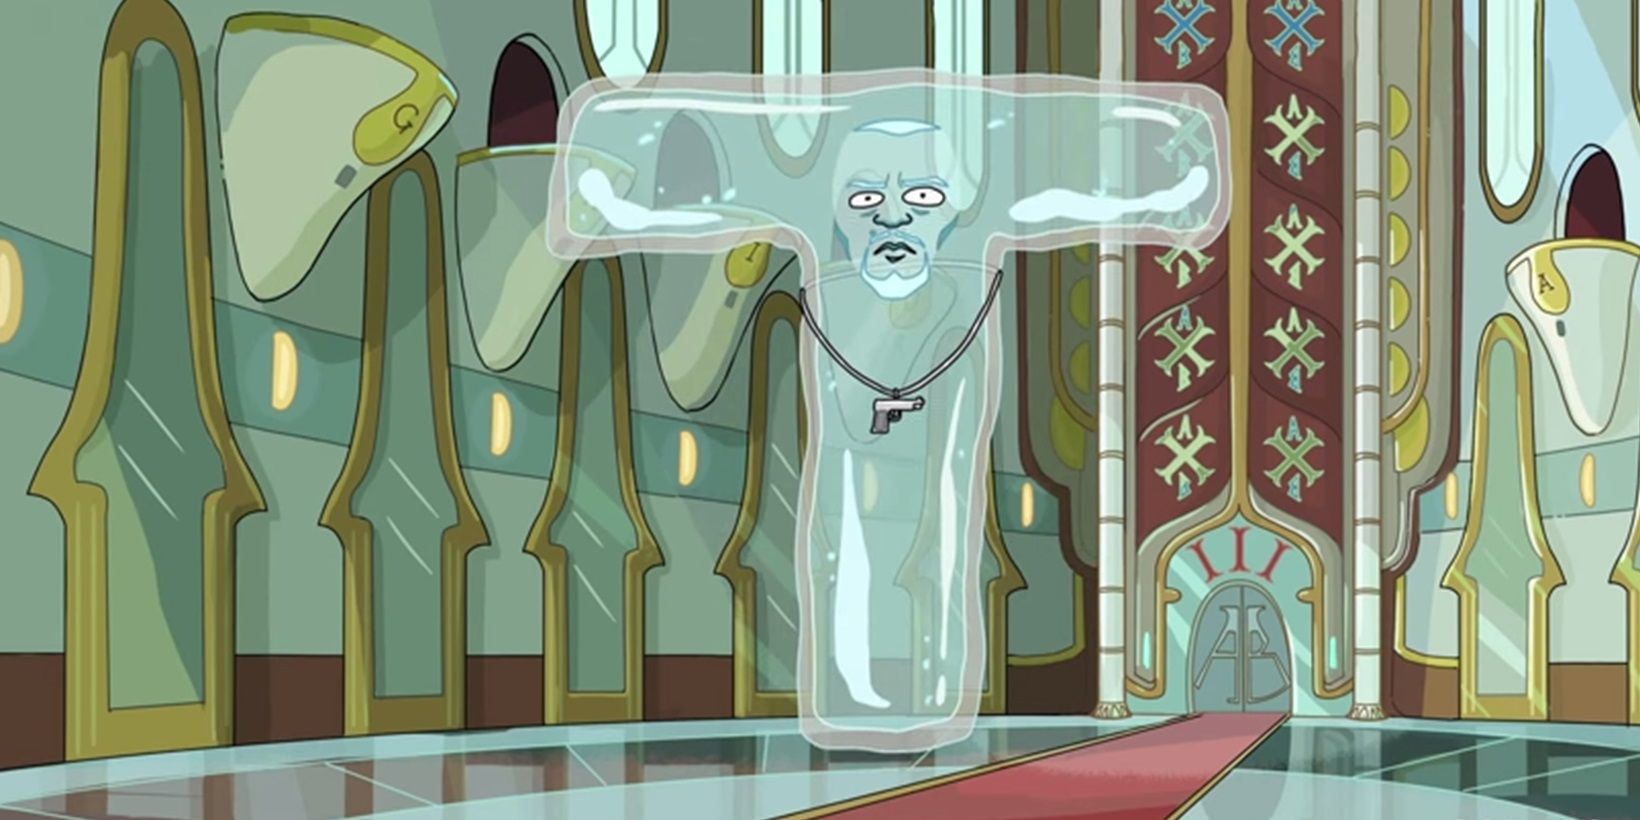 Ice-T returns to his homeworld in Rick and Morty